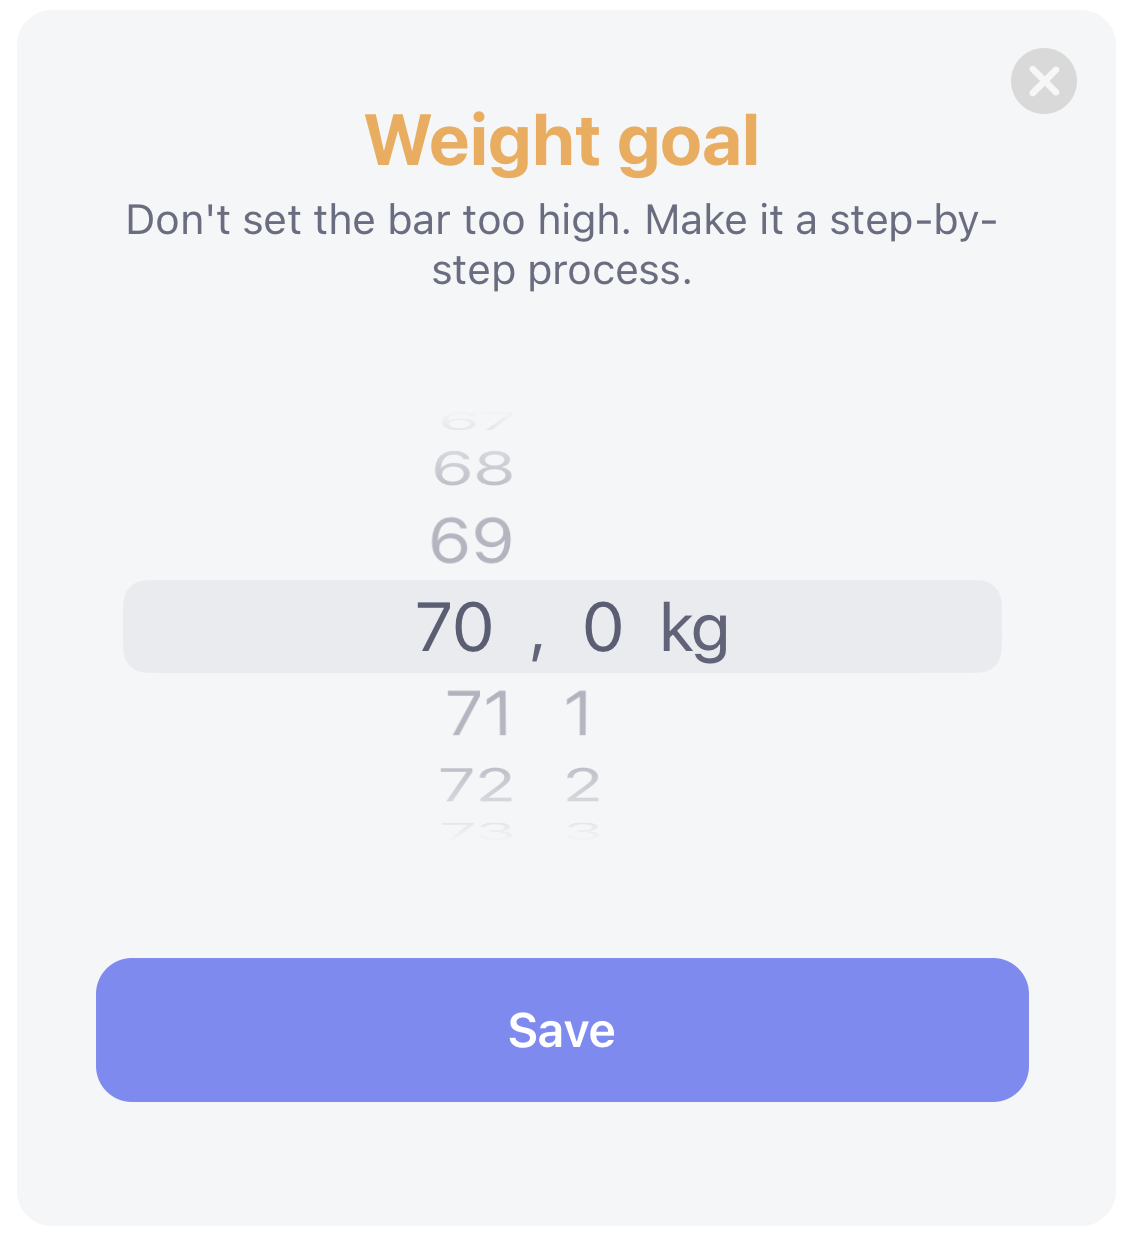 weight_goal_2.png